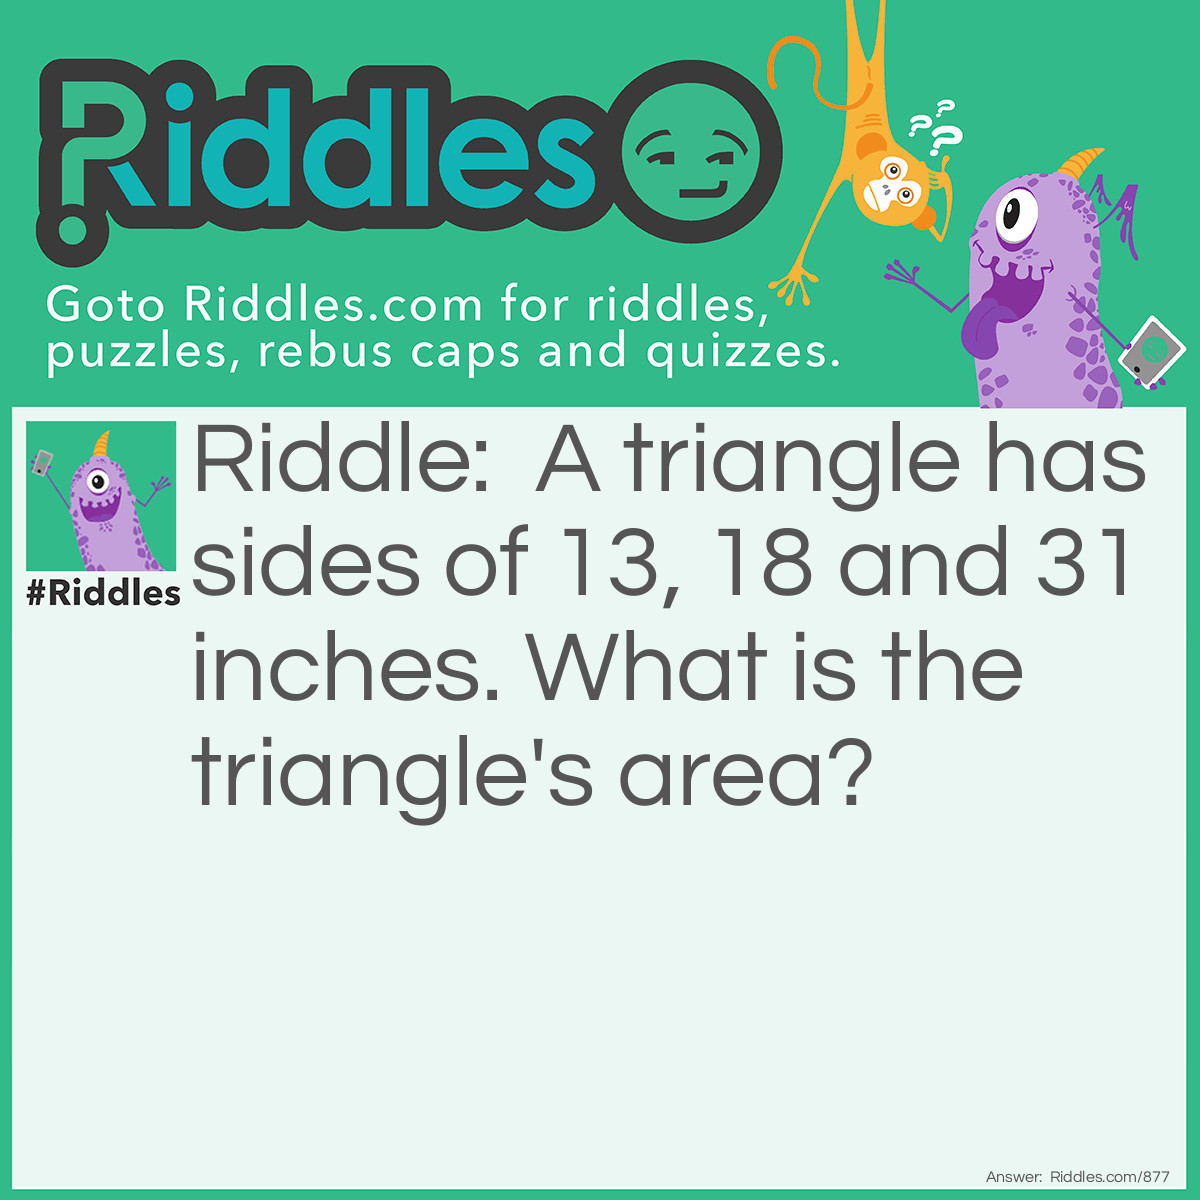 Riddle: A triangle has sides of 13, 18 and 31 inches. What is the triangle's area? Answer: Zero.  The two shorter sides of a triangle, when added together (13+18=31), must be greater than the third or longest side (31) for it to be a triangle by definition.  Therefore, the result would be two parallel lines with an area of 0.